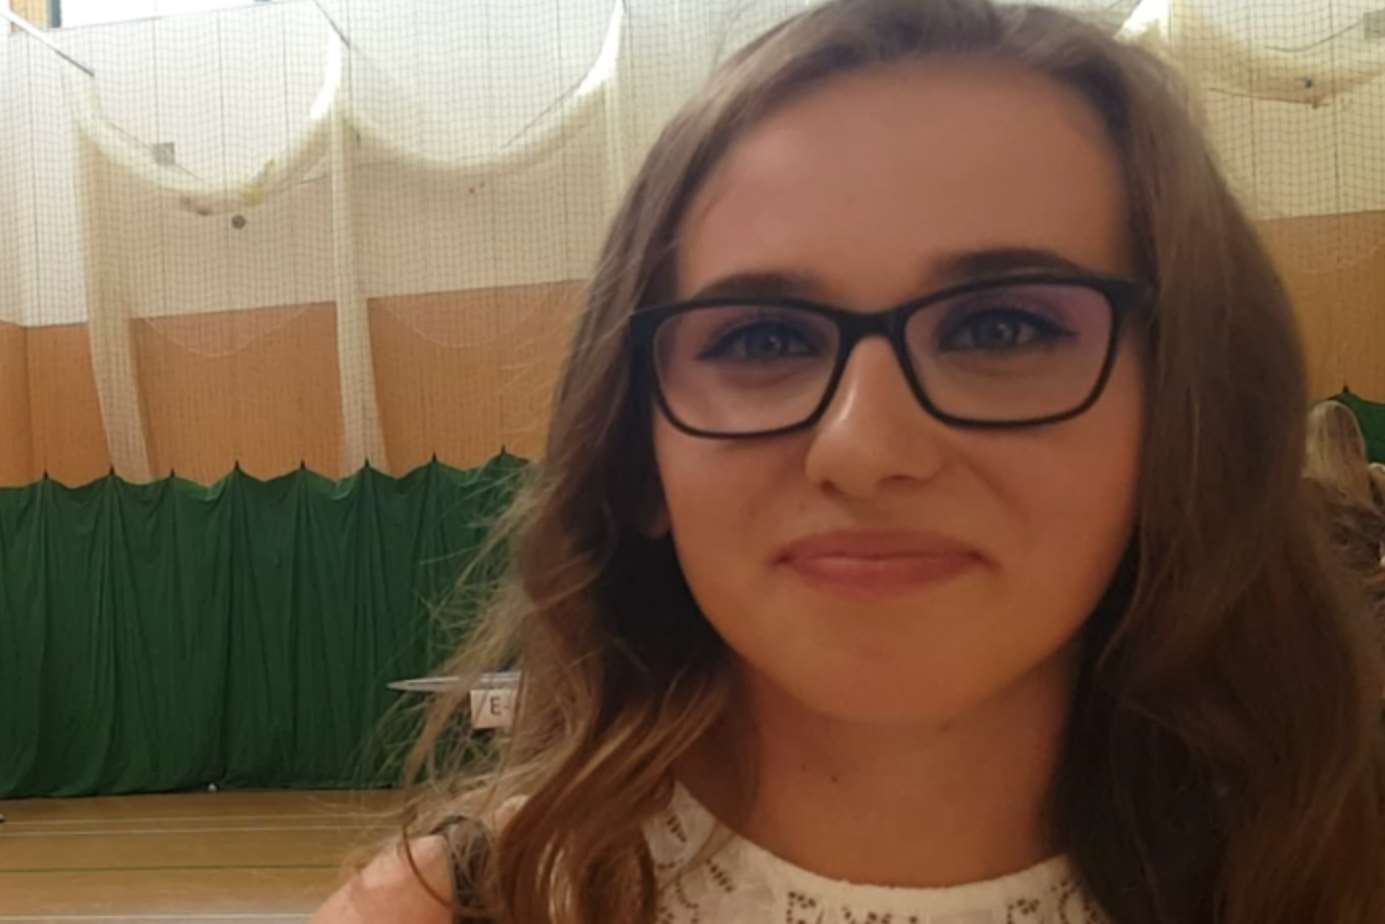 Wiktoria Mlynek came to Thanet five years ago and after learning English achieved her GCSE results